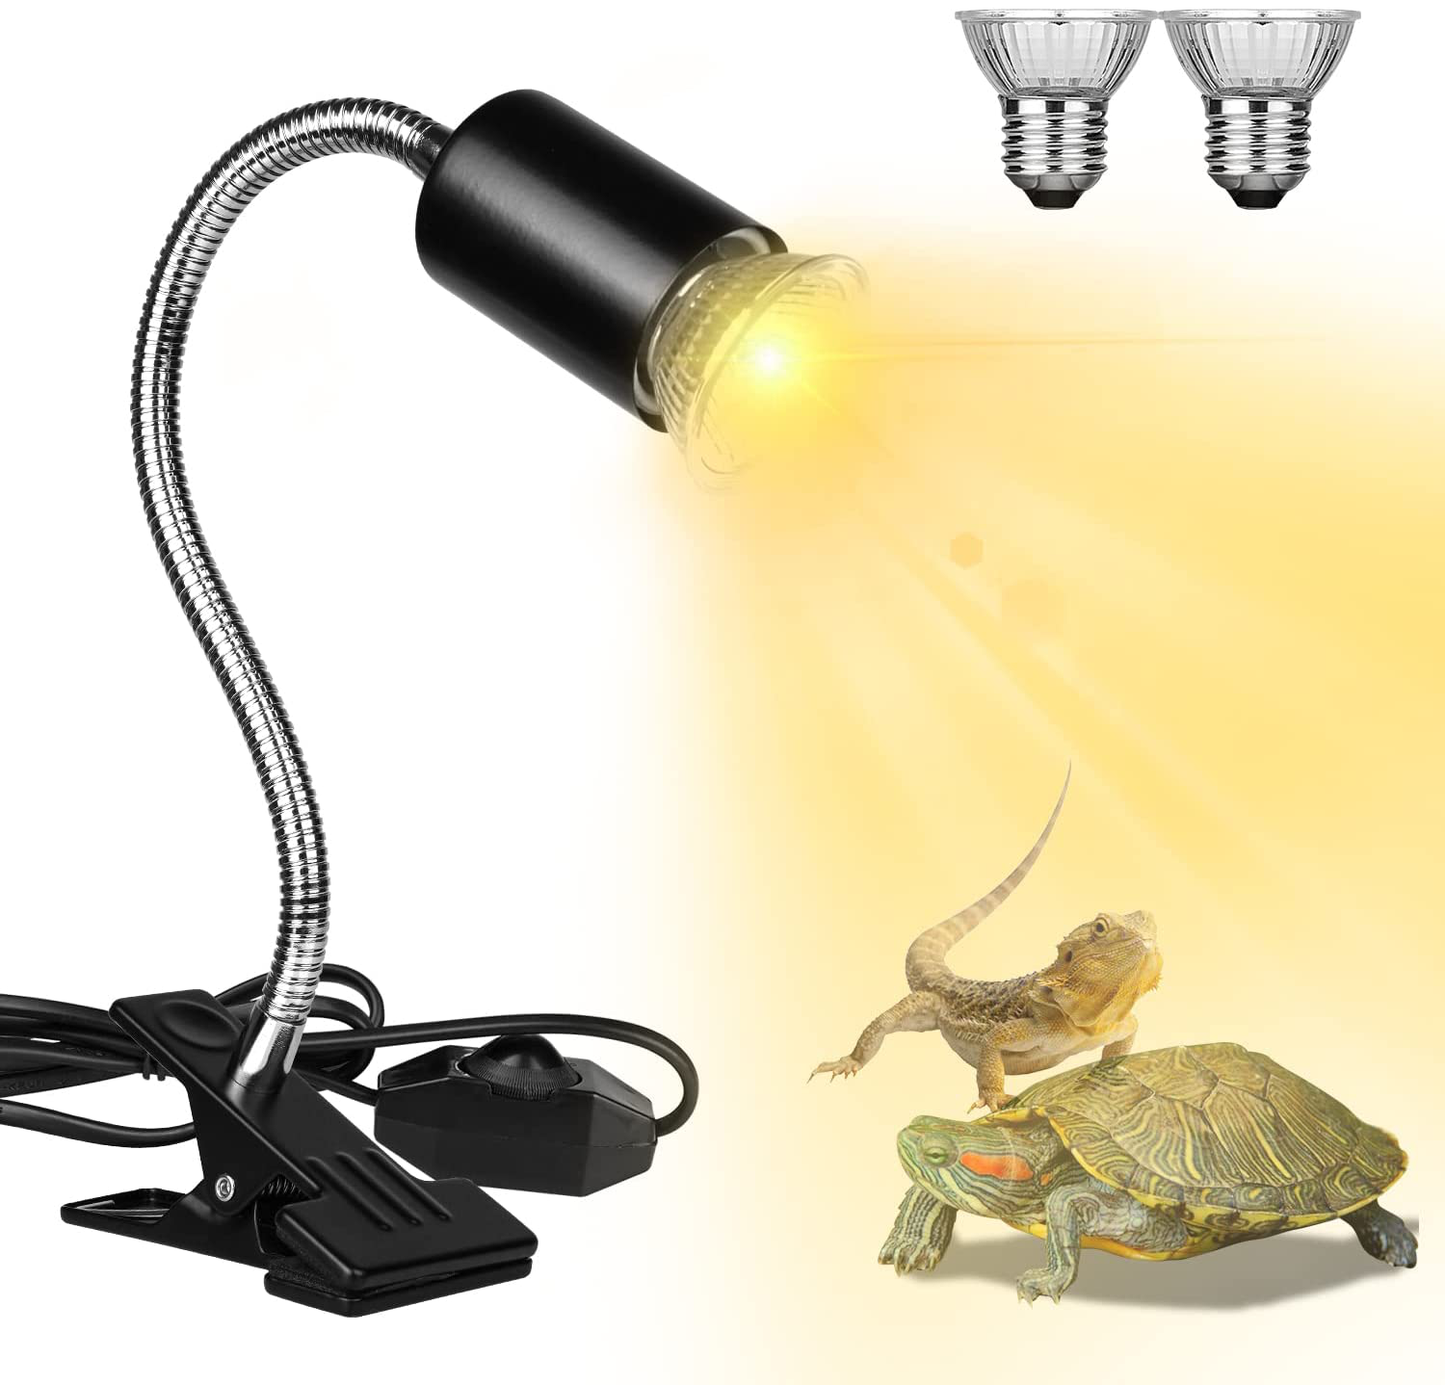 Reptile Heat Lamps, Turtle Lamp UVA/UVB Turtle Aquarium Tank Heating Lamps with Clamp, 360° Rotatable Basking Lamp for Lizard Turtle Snake Aquarium Aquatic Plants with 2 Heat Bulbs (E27,110V) Animals & Pet Supplies > Pet Supplies > Reptile & Amphibian Supplies > Reptile & Amphibian Habitat Heating & Lighting Dallfoll Turtle Lamp  